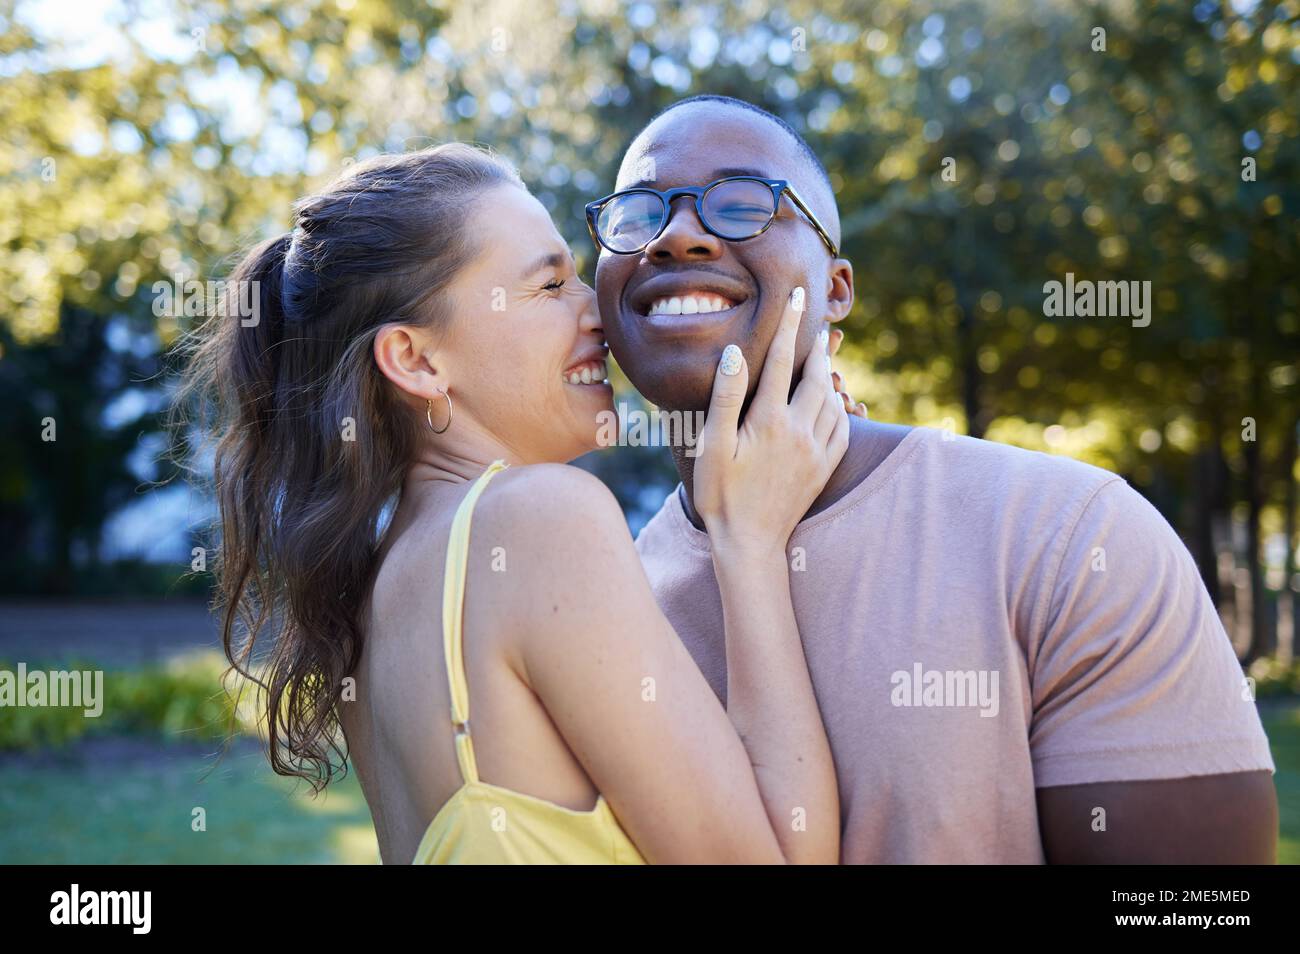 Summer, love and laugh with an interracial couple bonding outdoor together  in a park or garden. Nature, diversity and romance with a man and woman  Stock Photo - Alamy